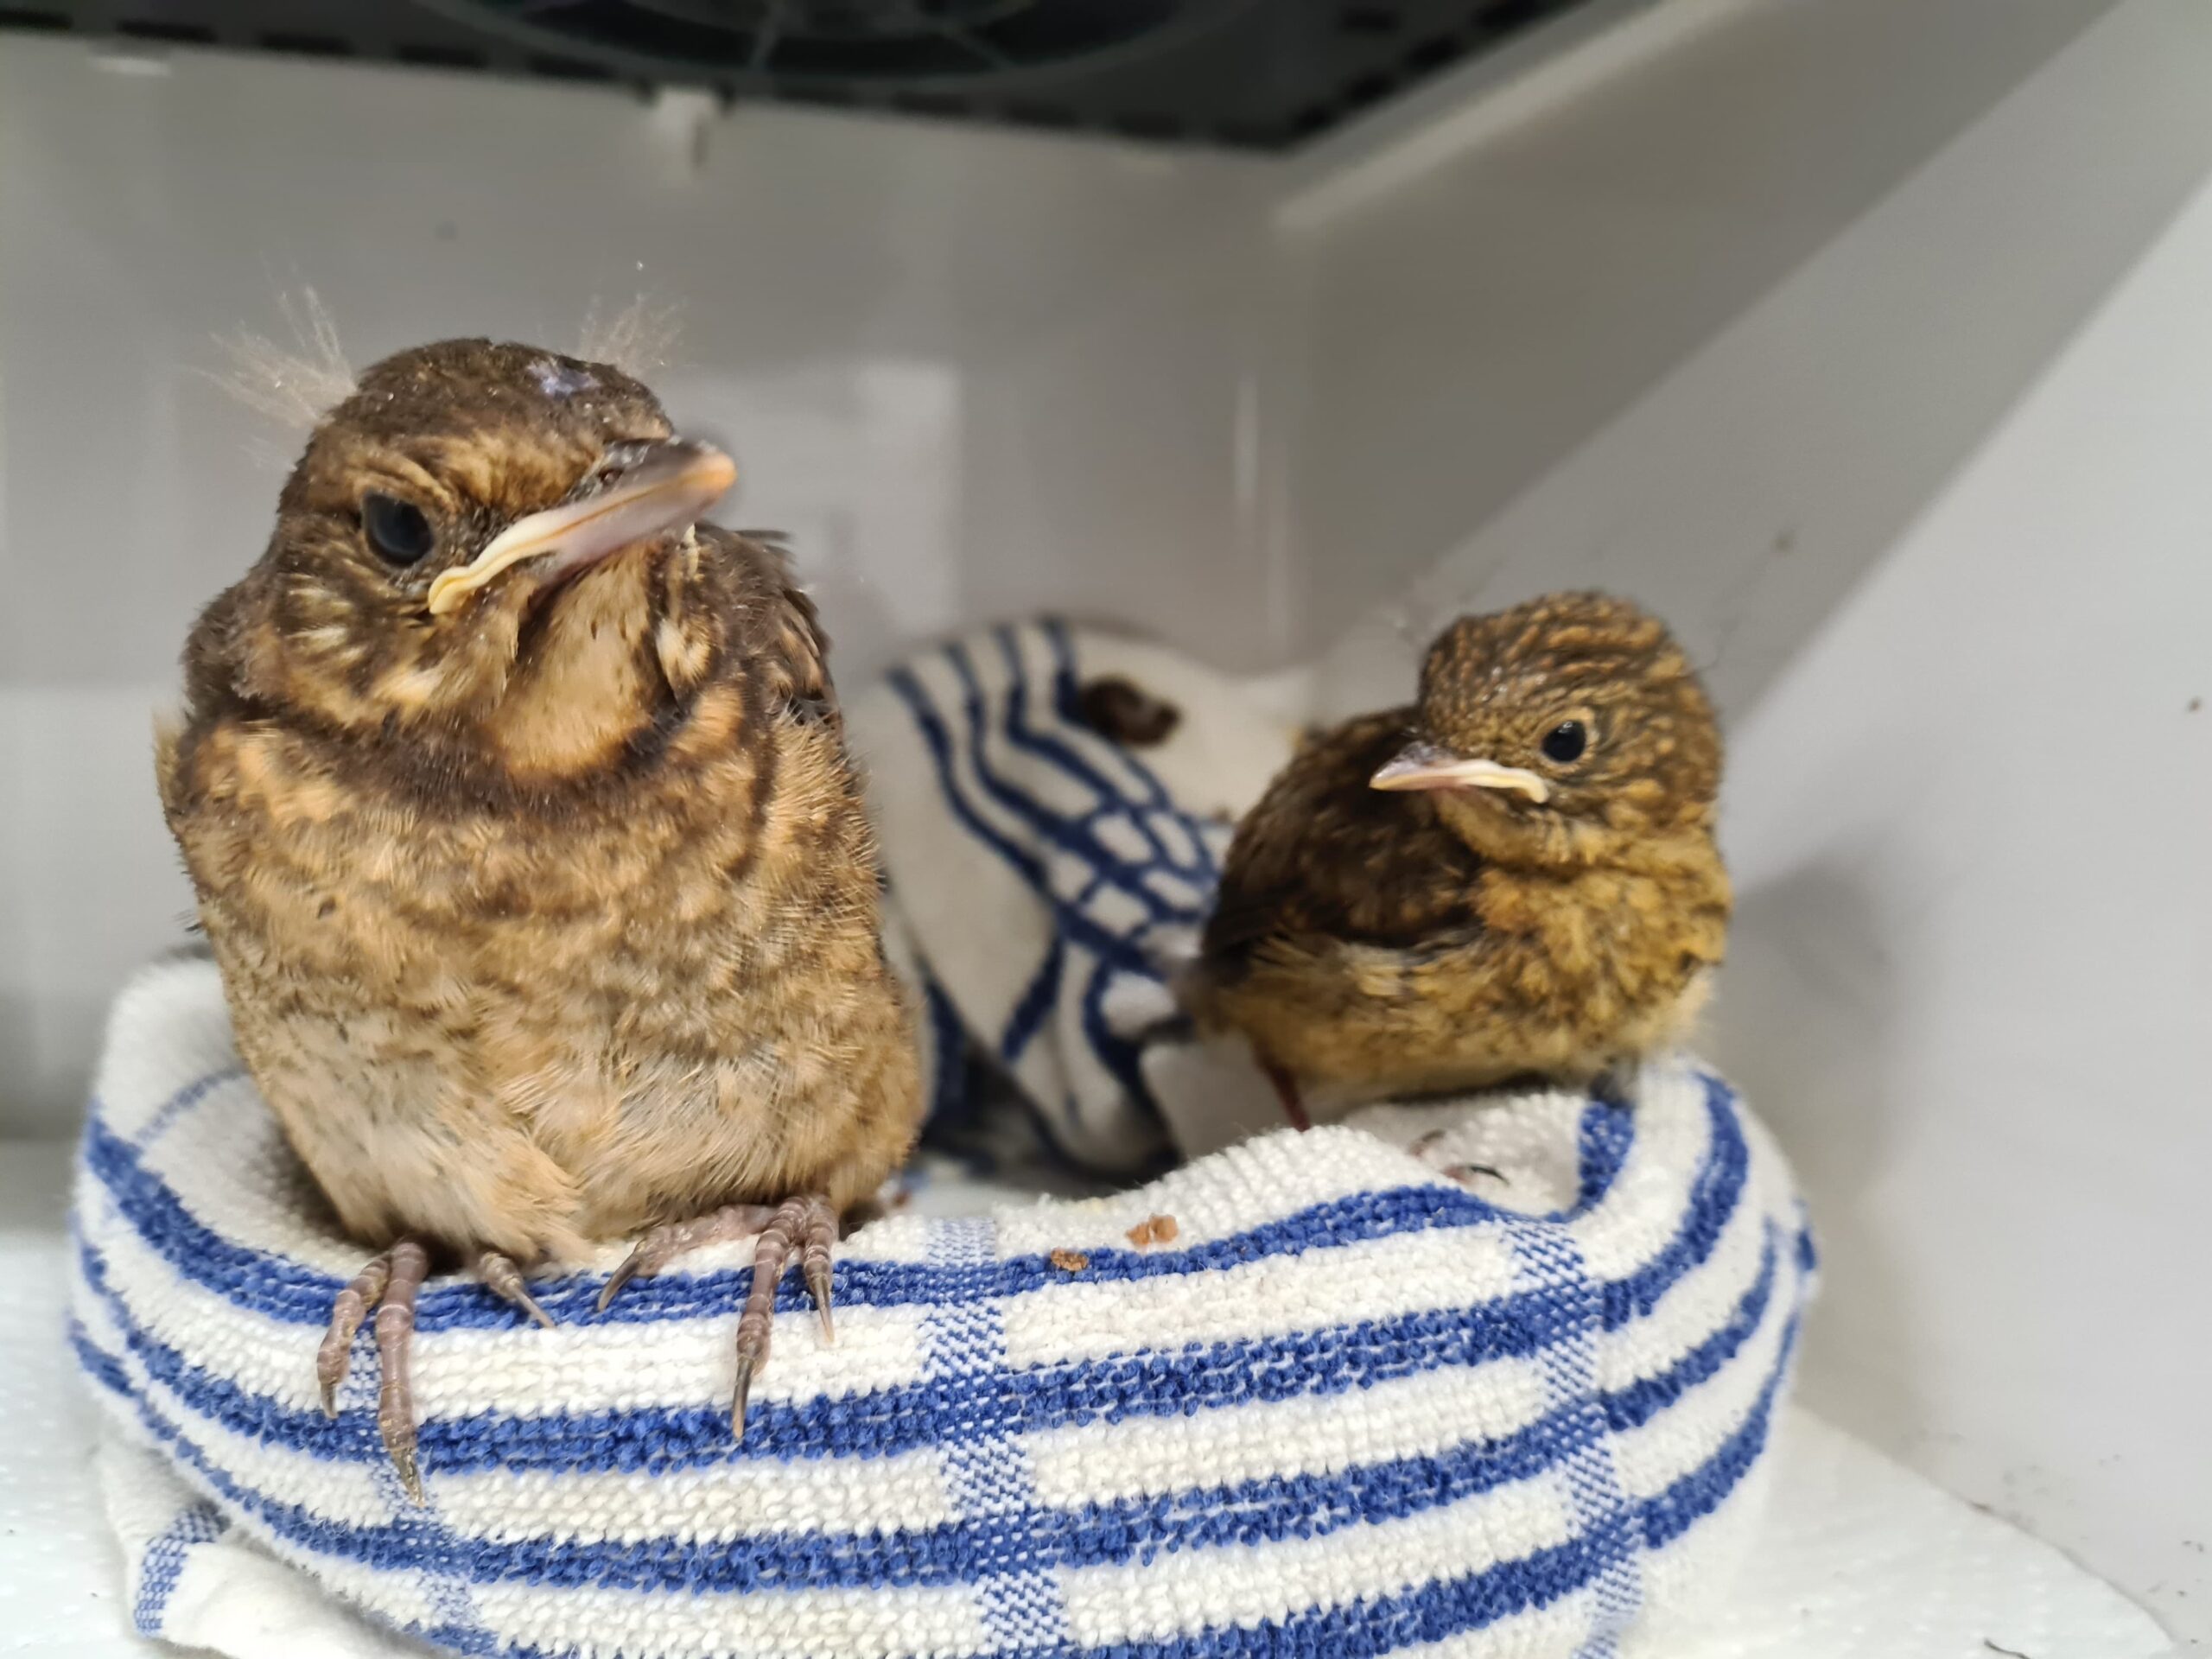 Robin and blackbird chick being cared for